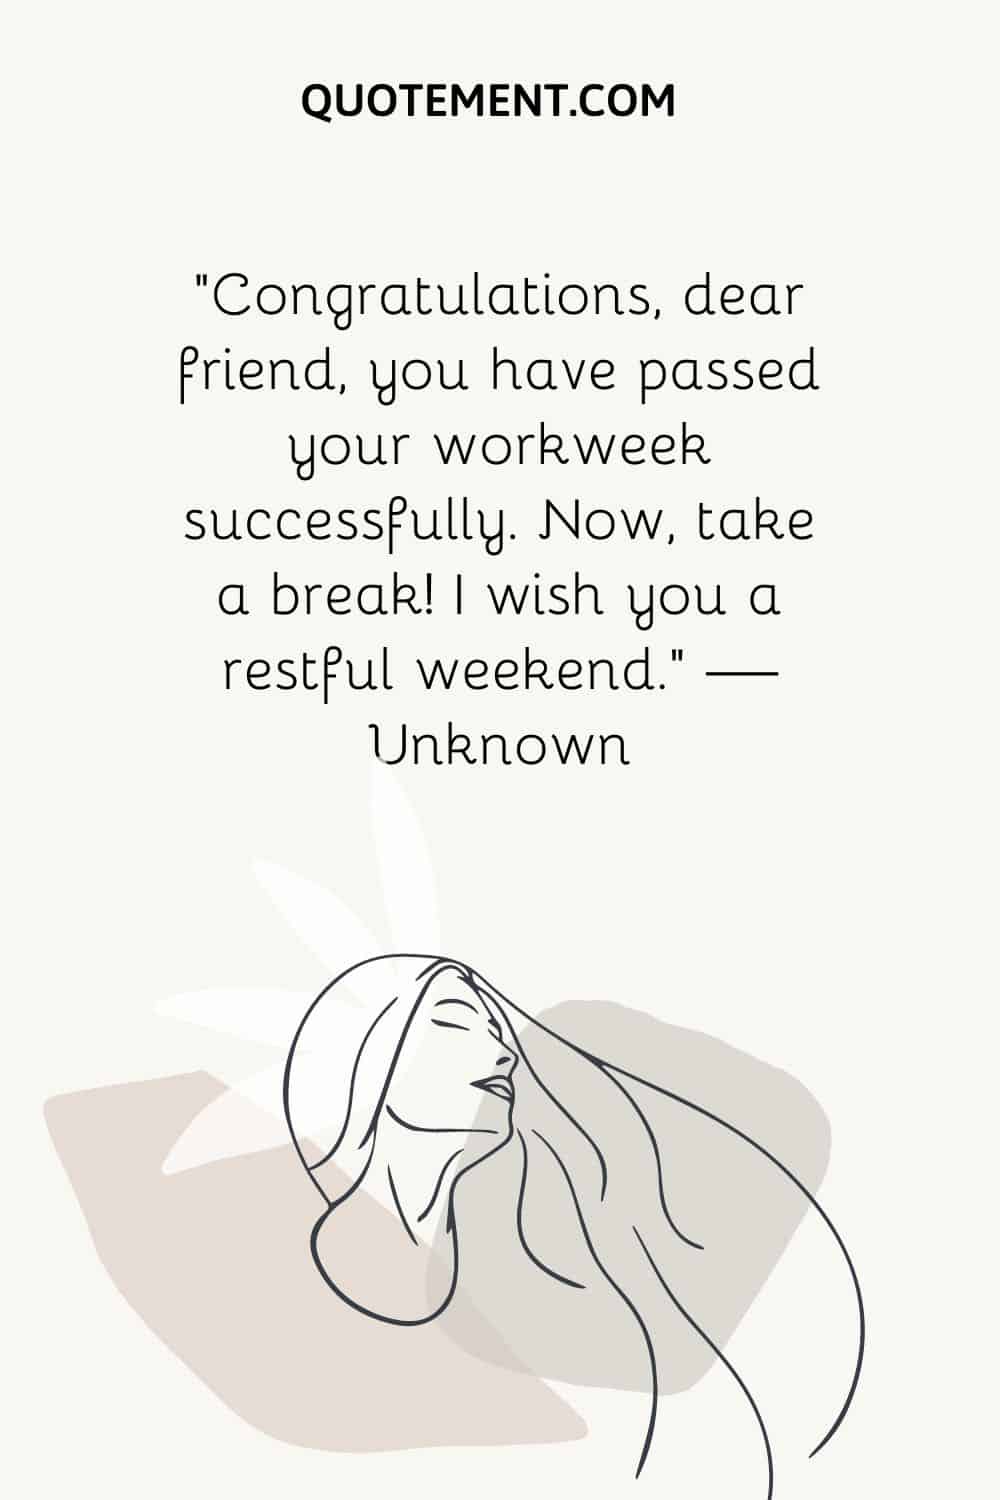 “Congratulations, dear friend, you have passed your workweek successfully. Now, take a break! I wish you a restful weekend.” — Unknown